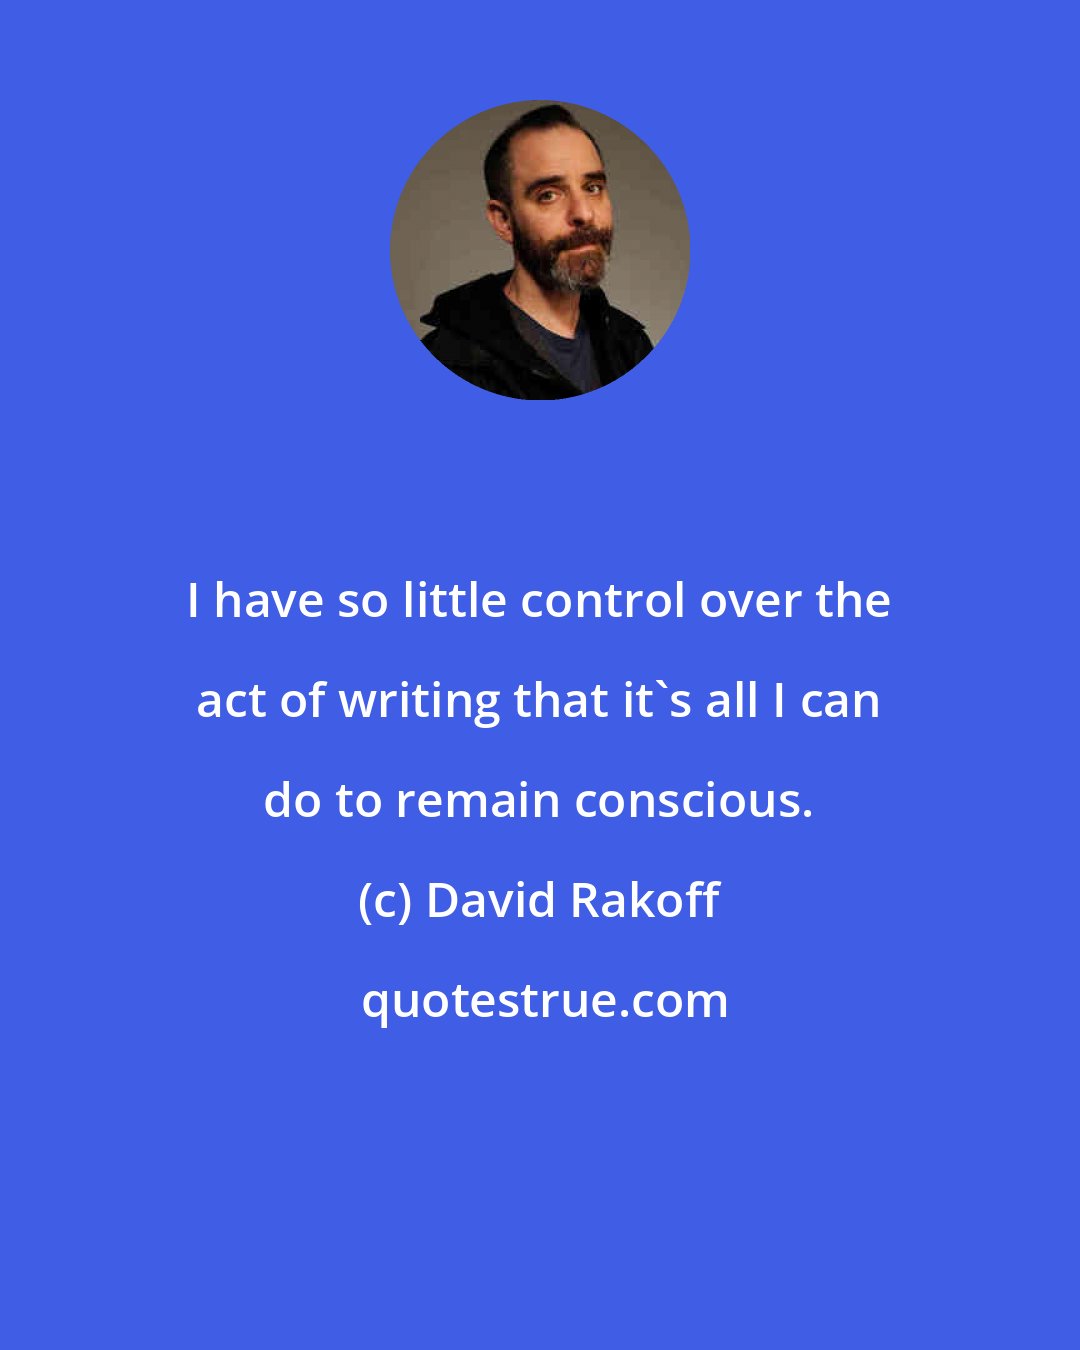 David Rakoff: I have so little control over the act of writing that it's all I can do to remain conscious.